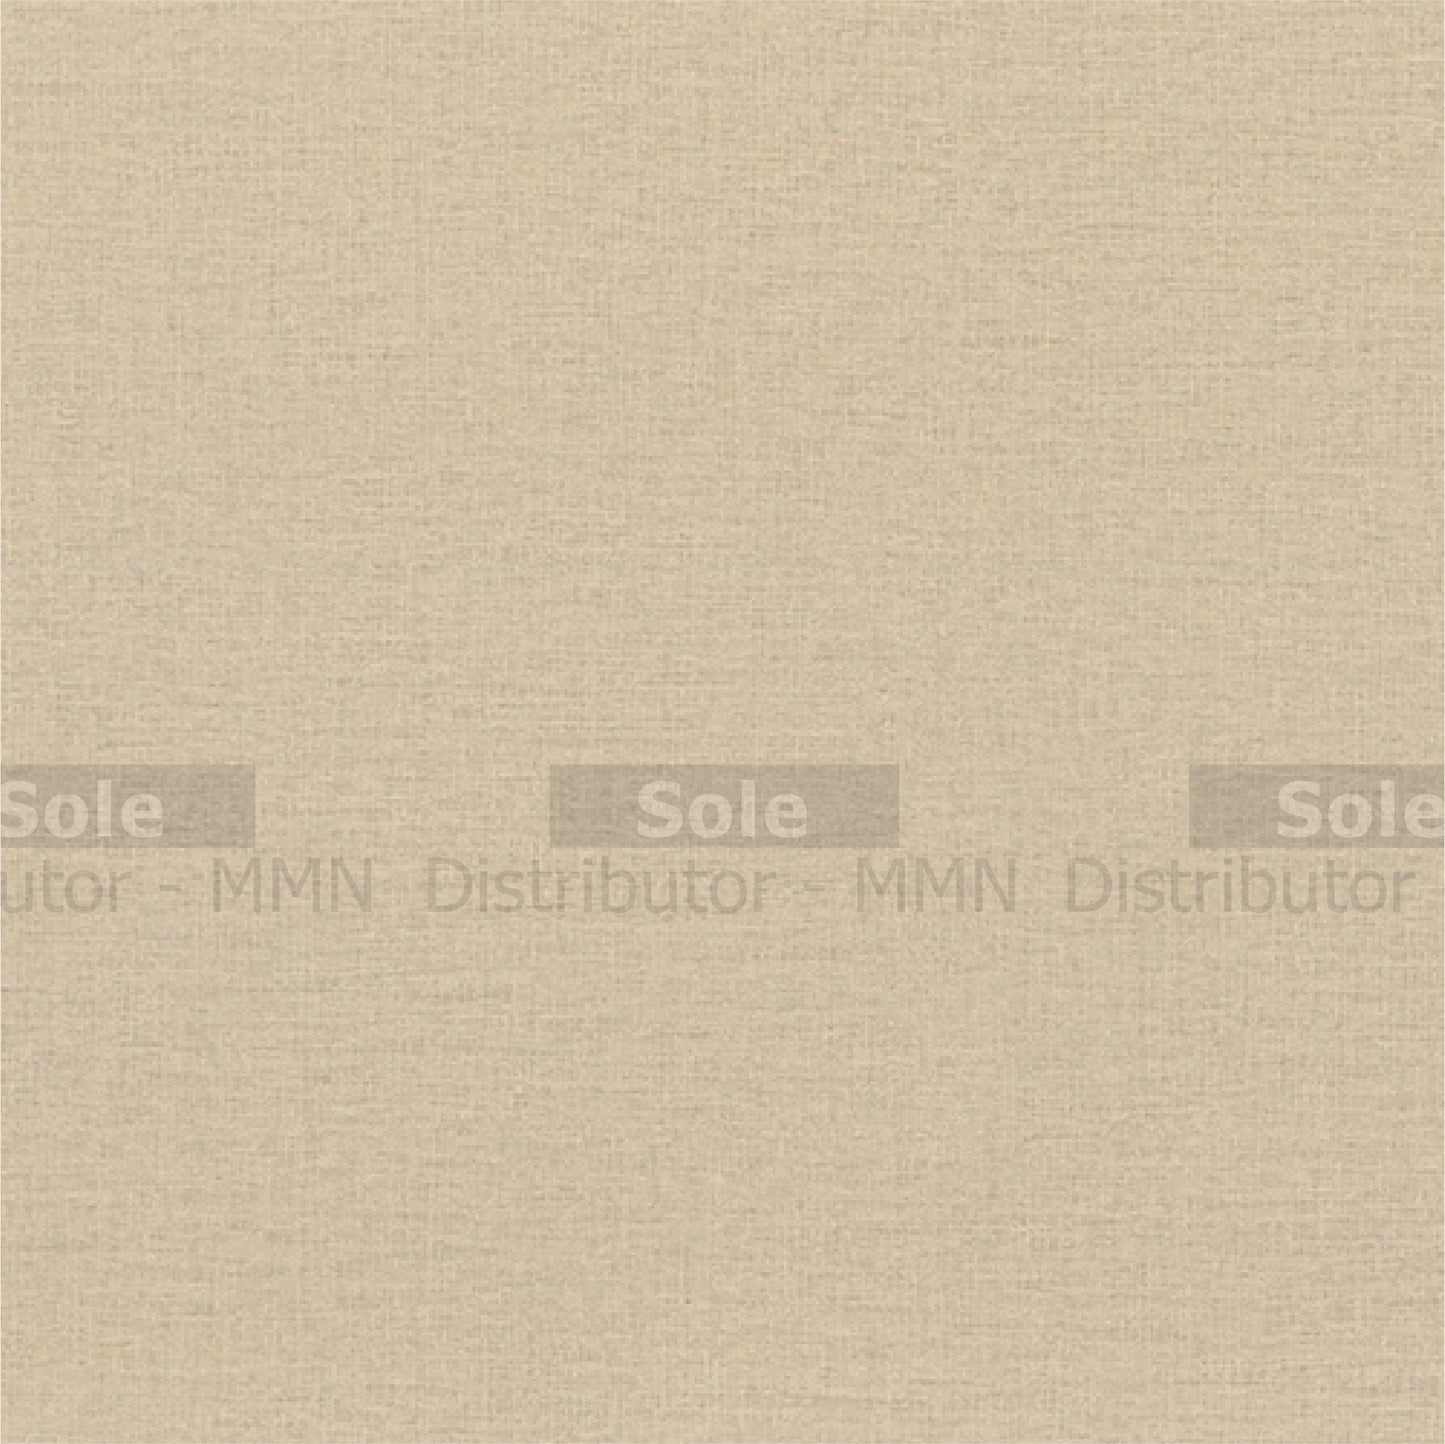 Egger Board Beige Textile, Thickness 18mm, Size 2800x2070mm - F416 - ST10